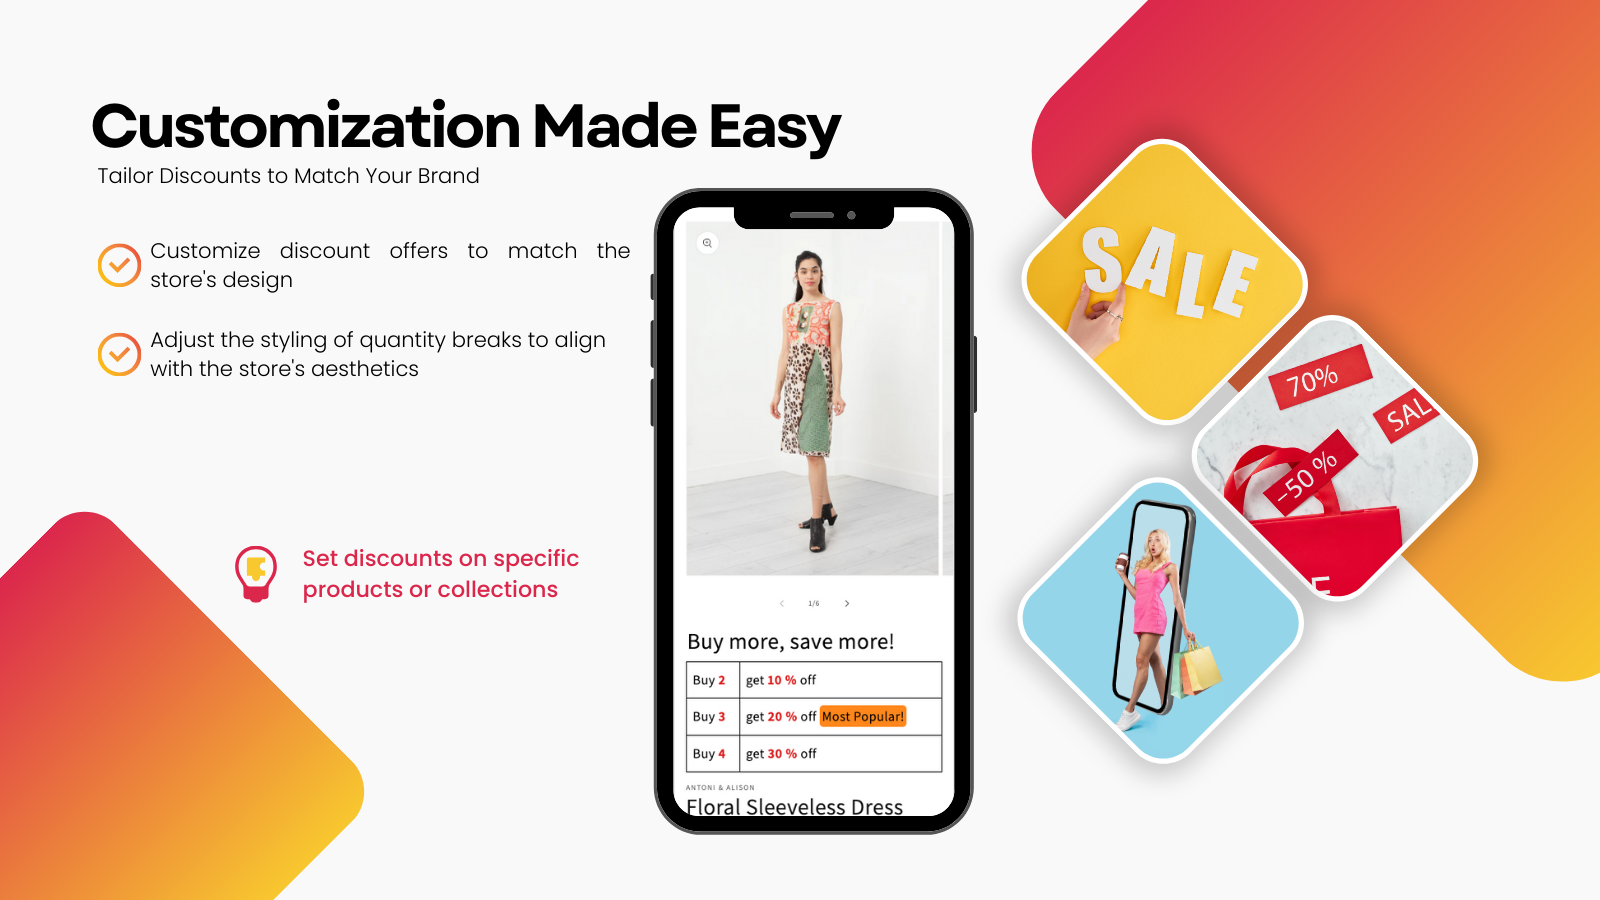 Mega Volume Discount Customization Made Easy to Match Your Brand